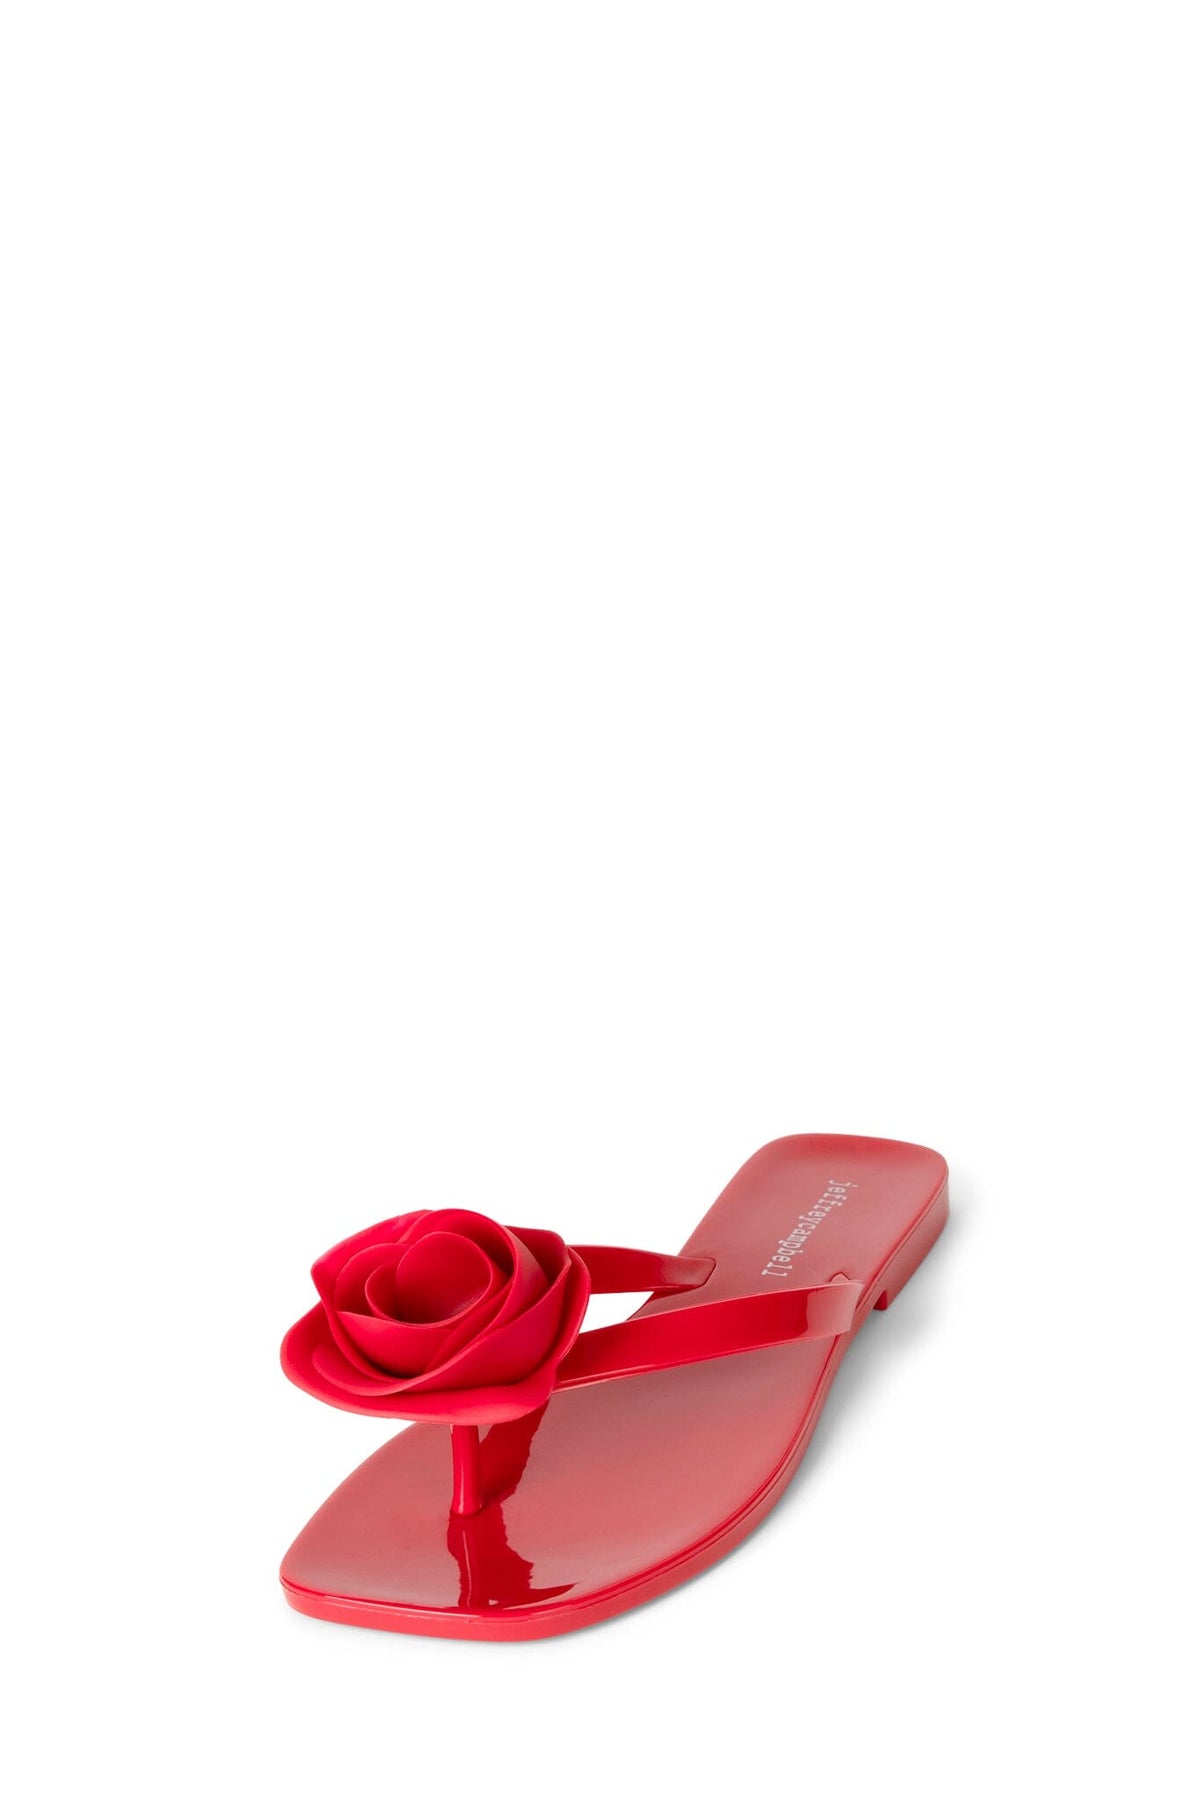 SO-SWEET Jeffrey Campbell Flat Jelly Sandals Red Shiny